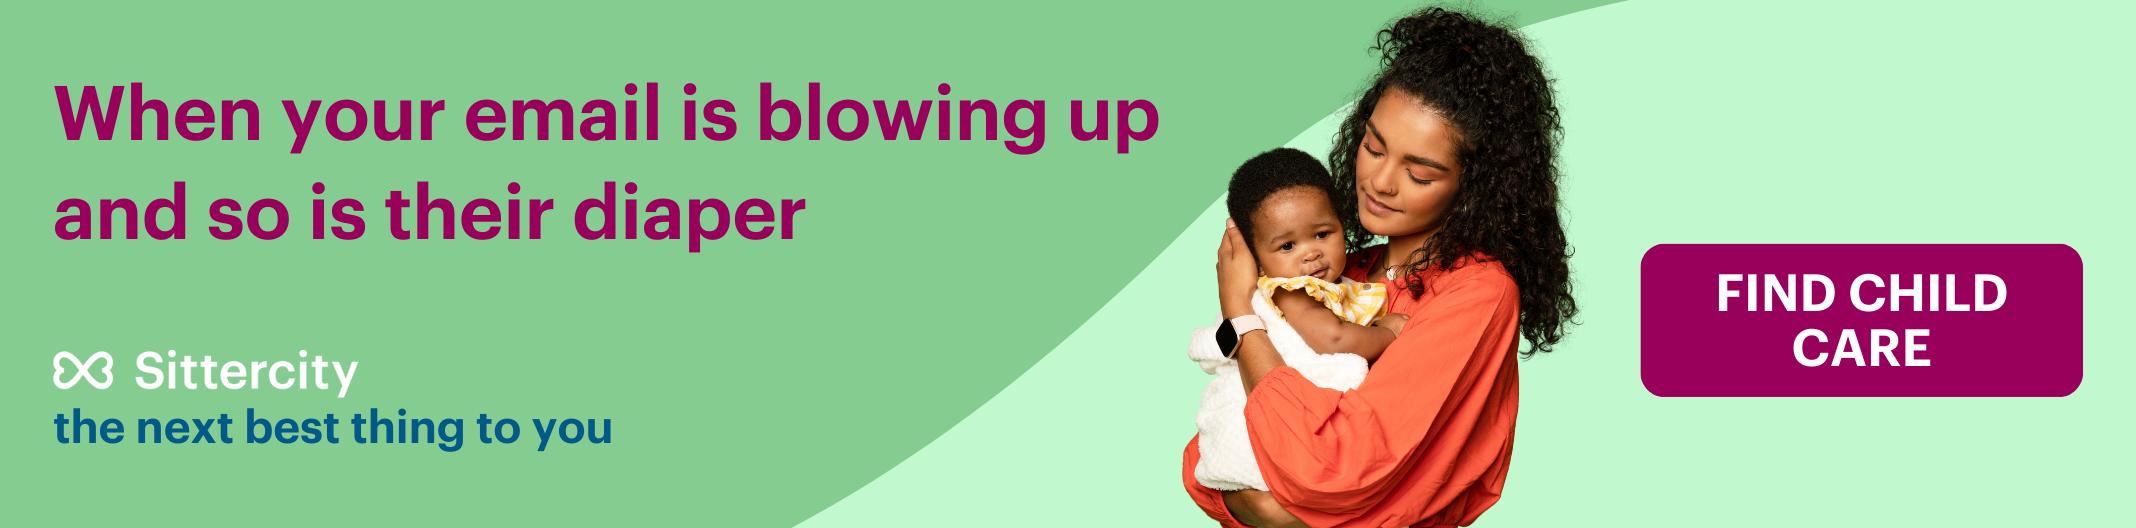 Green banner with text saying "When your email is blowing up and so is their diaper" and showing a caregiver holding a smiling baby.